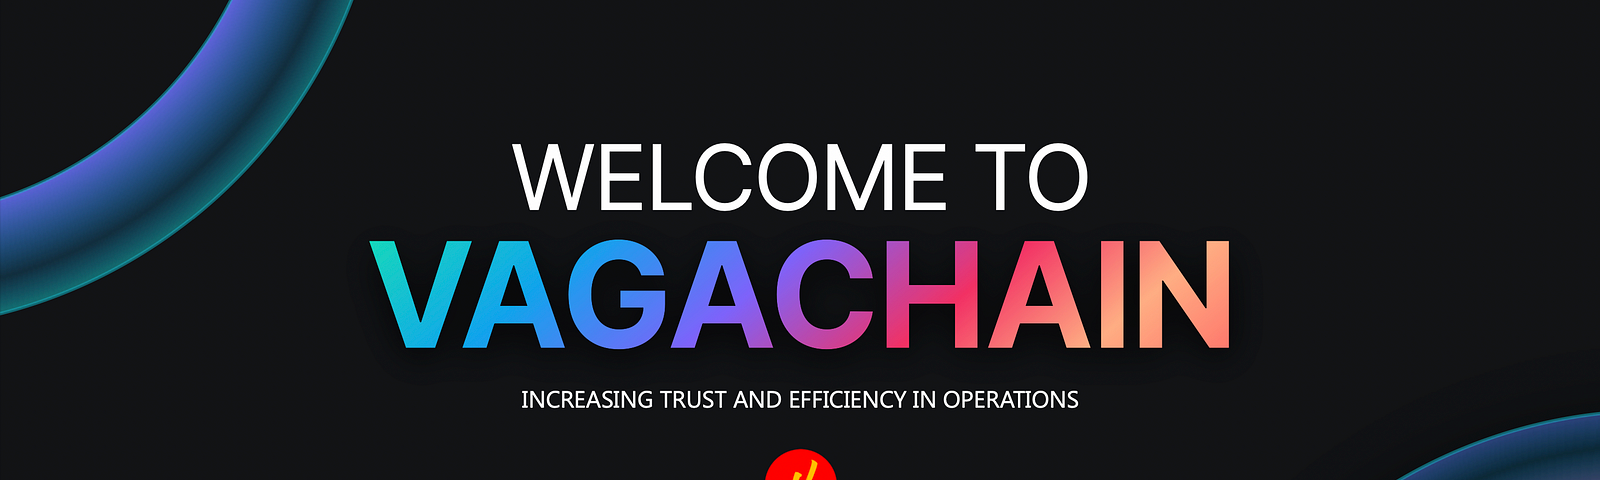 Welcome to VagaChain. Increasing trust and efficiency in operations.